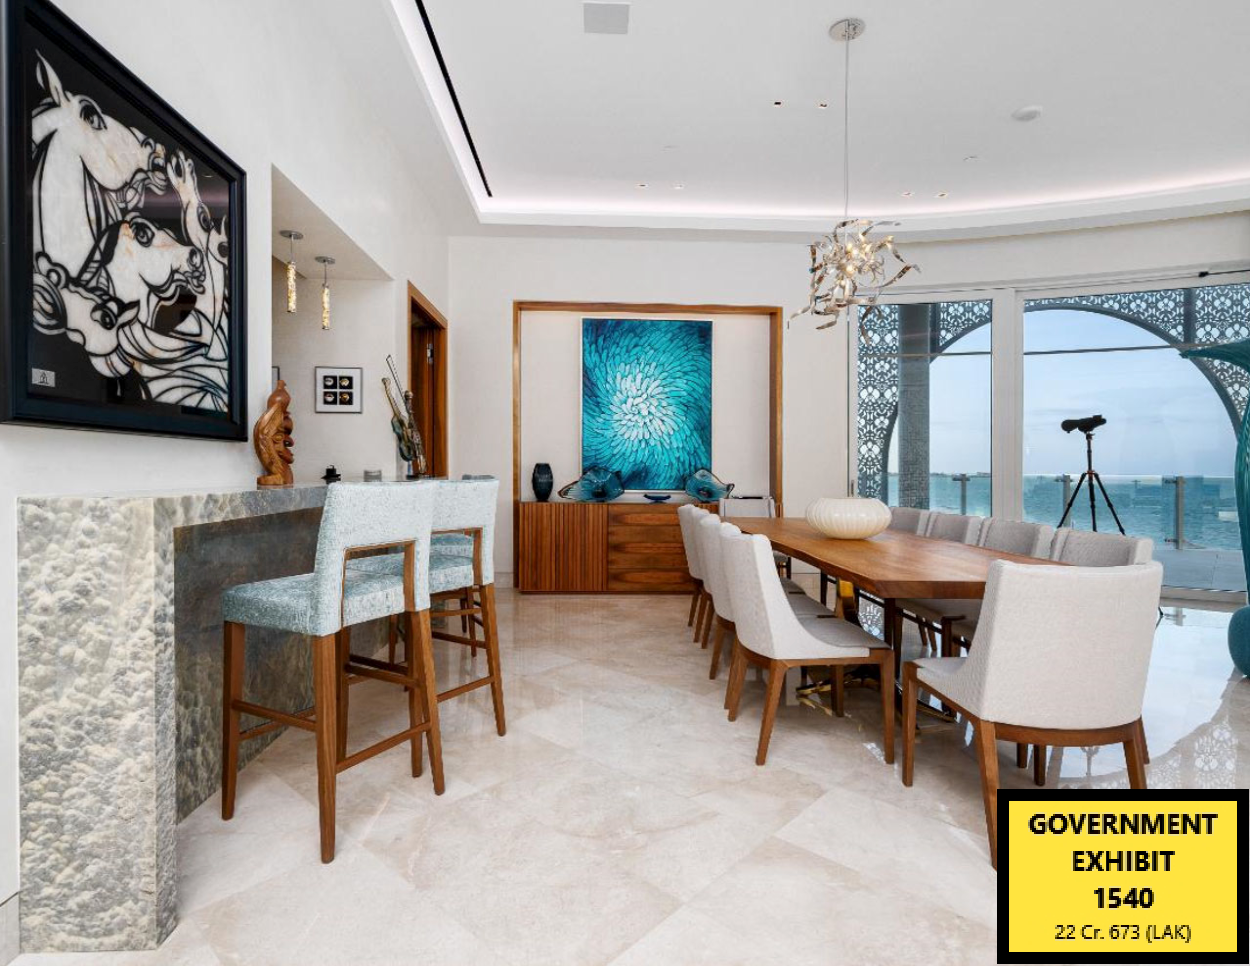 Prosecutors shared photos of Sam Bankman-Fried's $35 million penthouse in the criminal trial against the FTX cofounder.